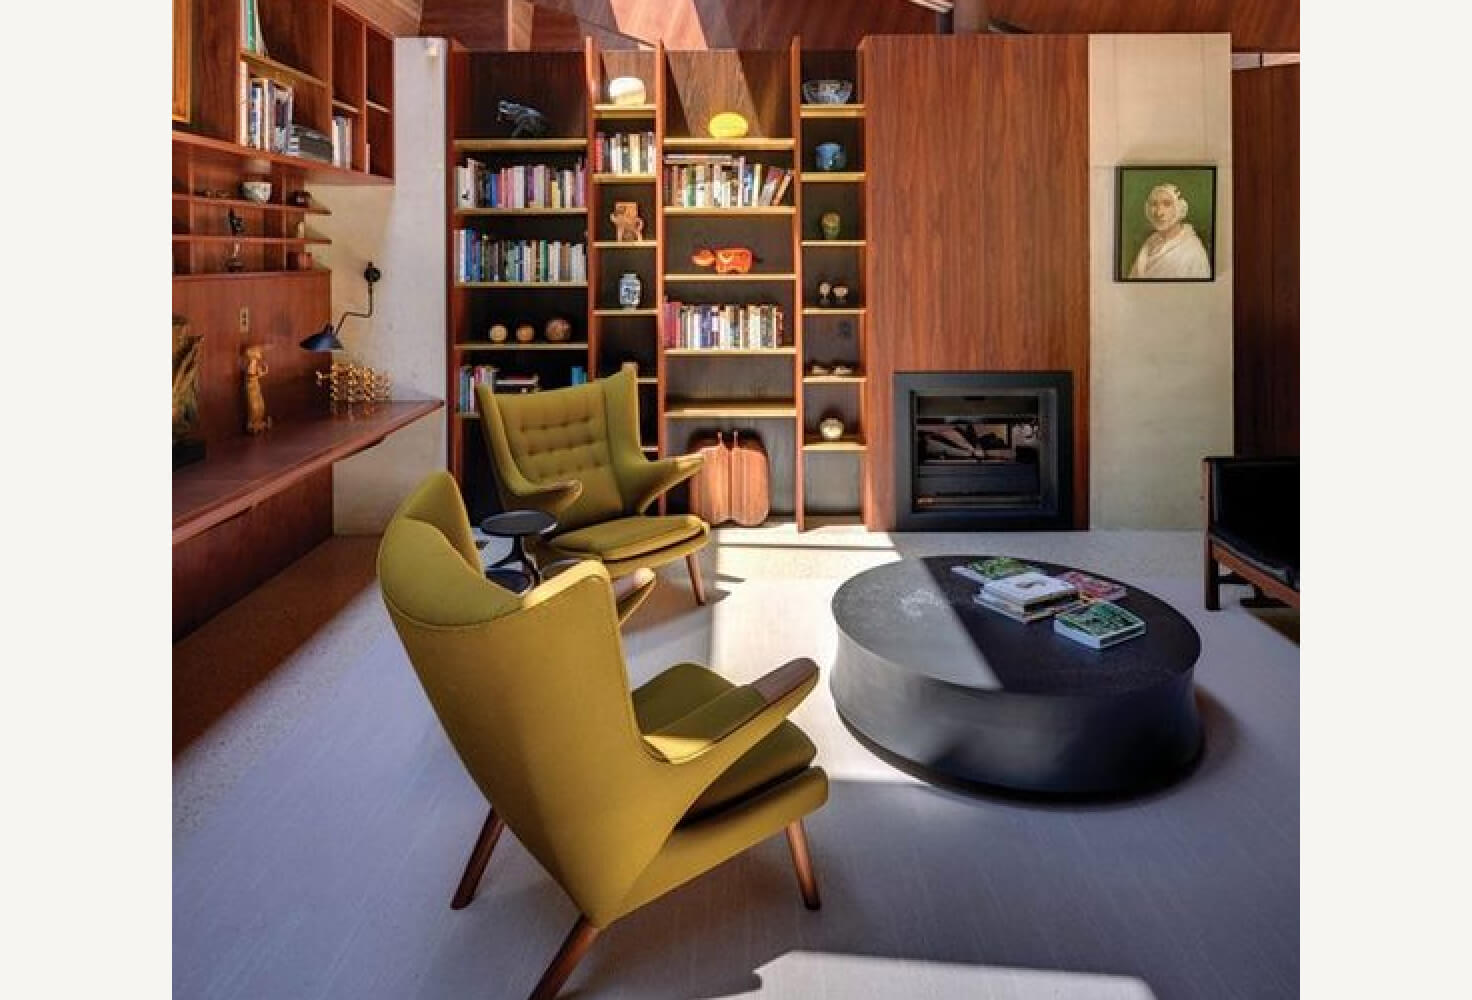 Photograph of a Danish Modern Style home library with mid-century furnishings and decor.